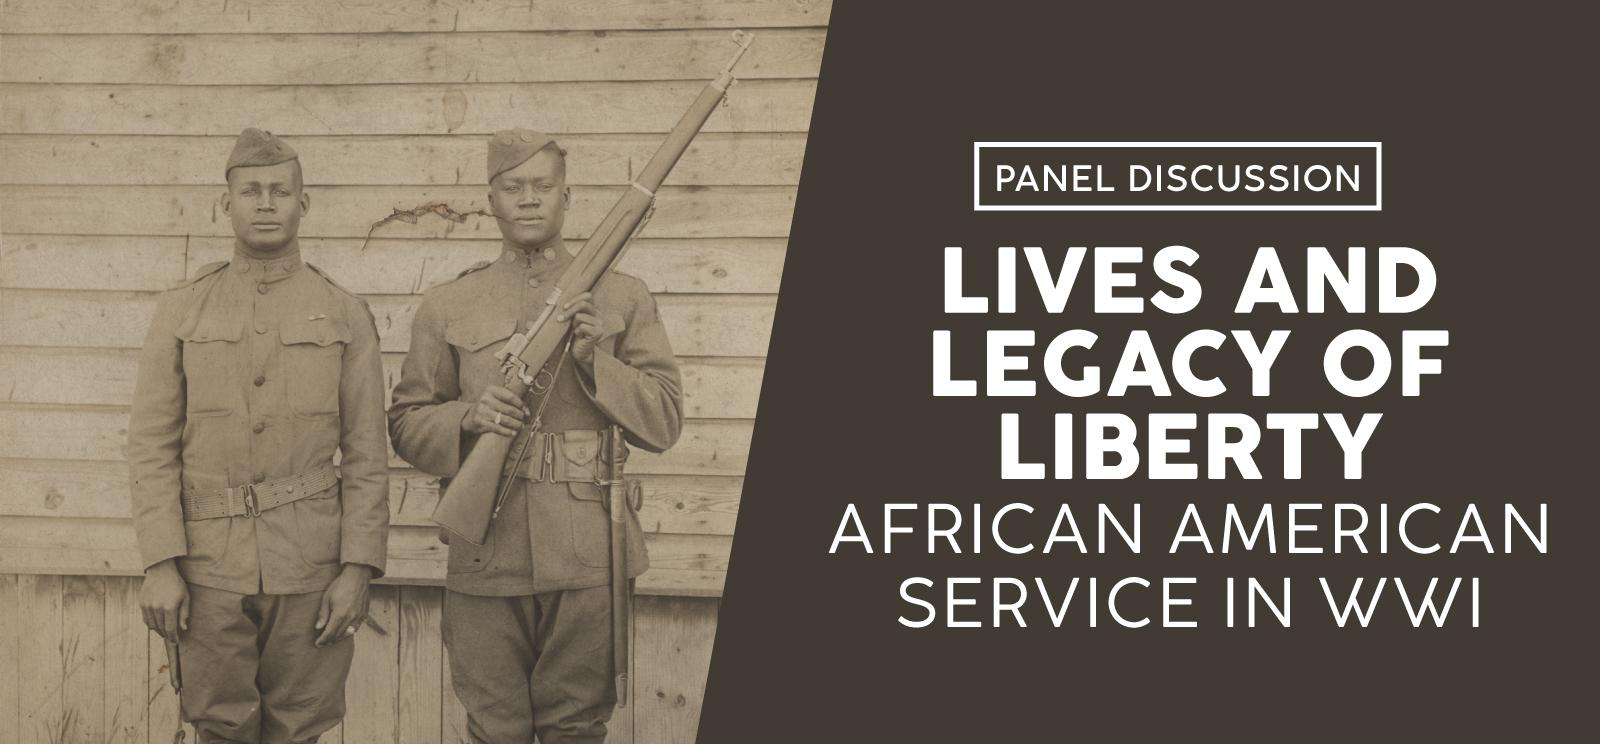 Image: Sepia photograph of two Black WWI soldiers standing at attention in front of a shingled wall. One soldier holds a rifle across his chest. Text: Lives and Legacy of Liberty / African American Service in WWI